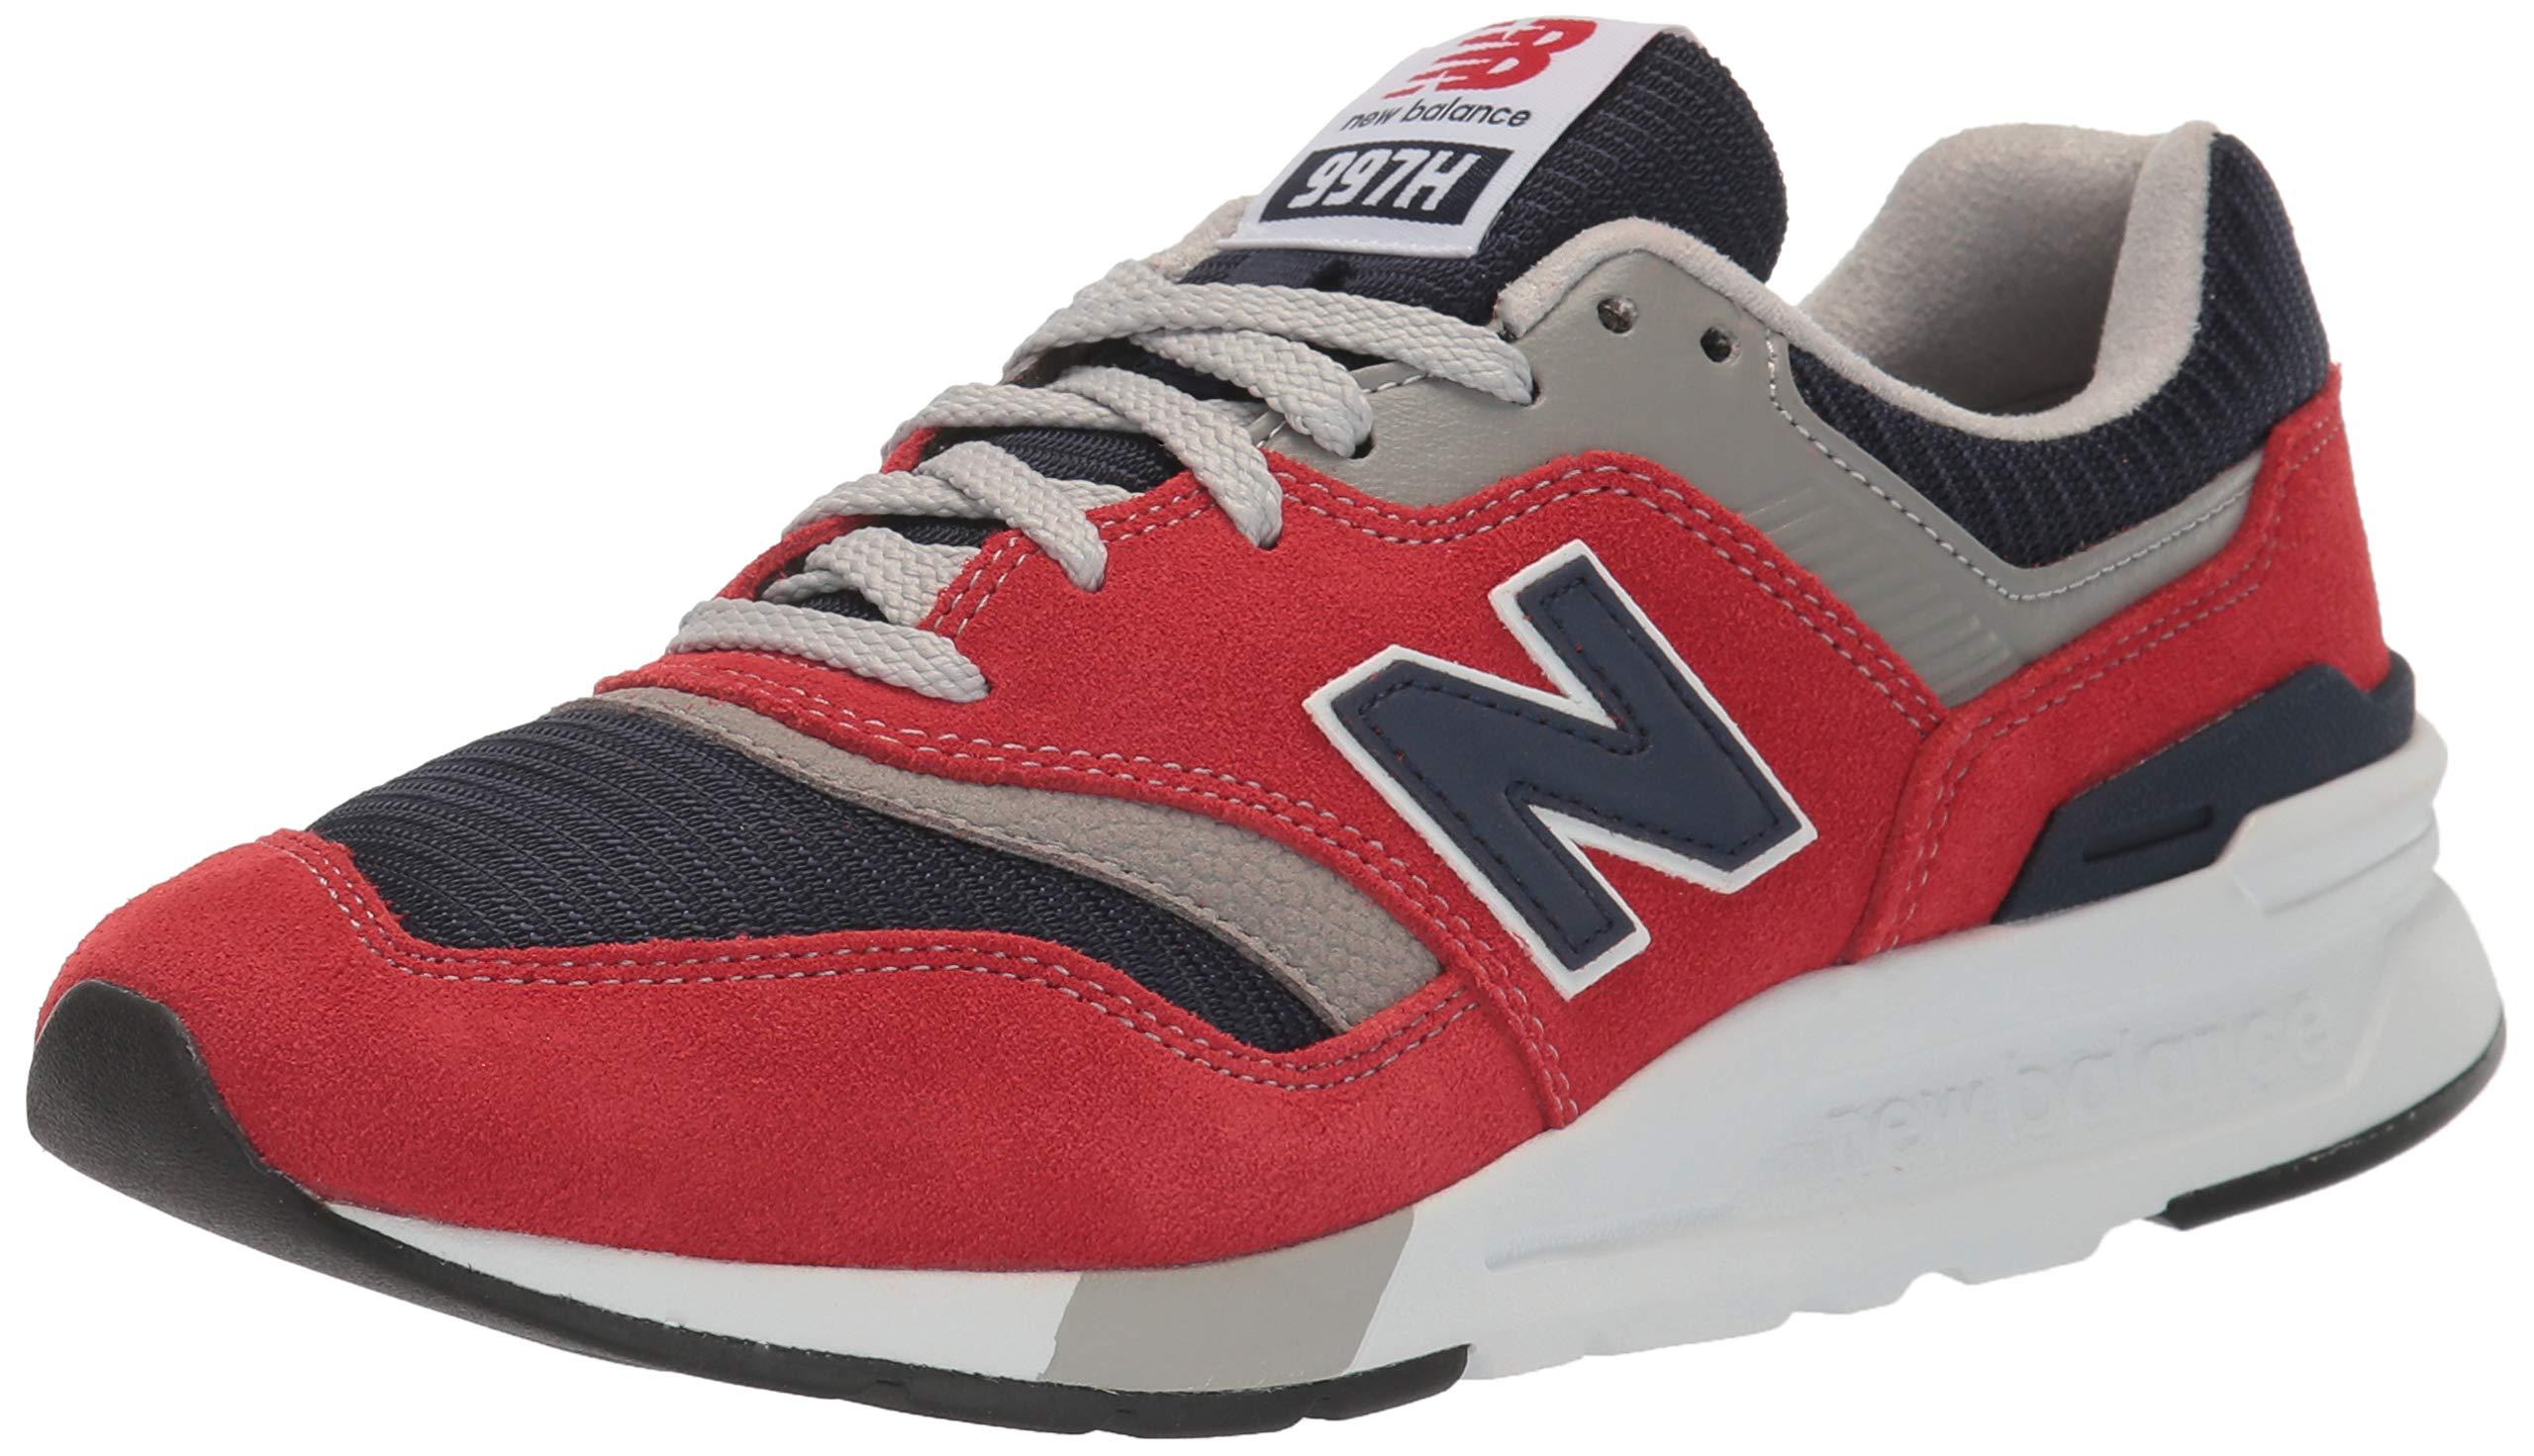 New Balance Rubber 997h V1 Lifestyle Sneaker in Red - Save 57% | Lyst